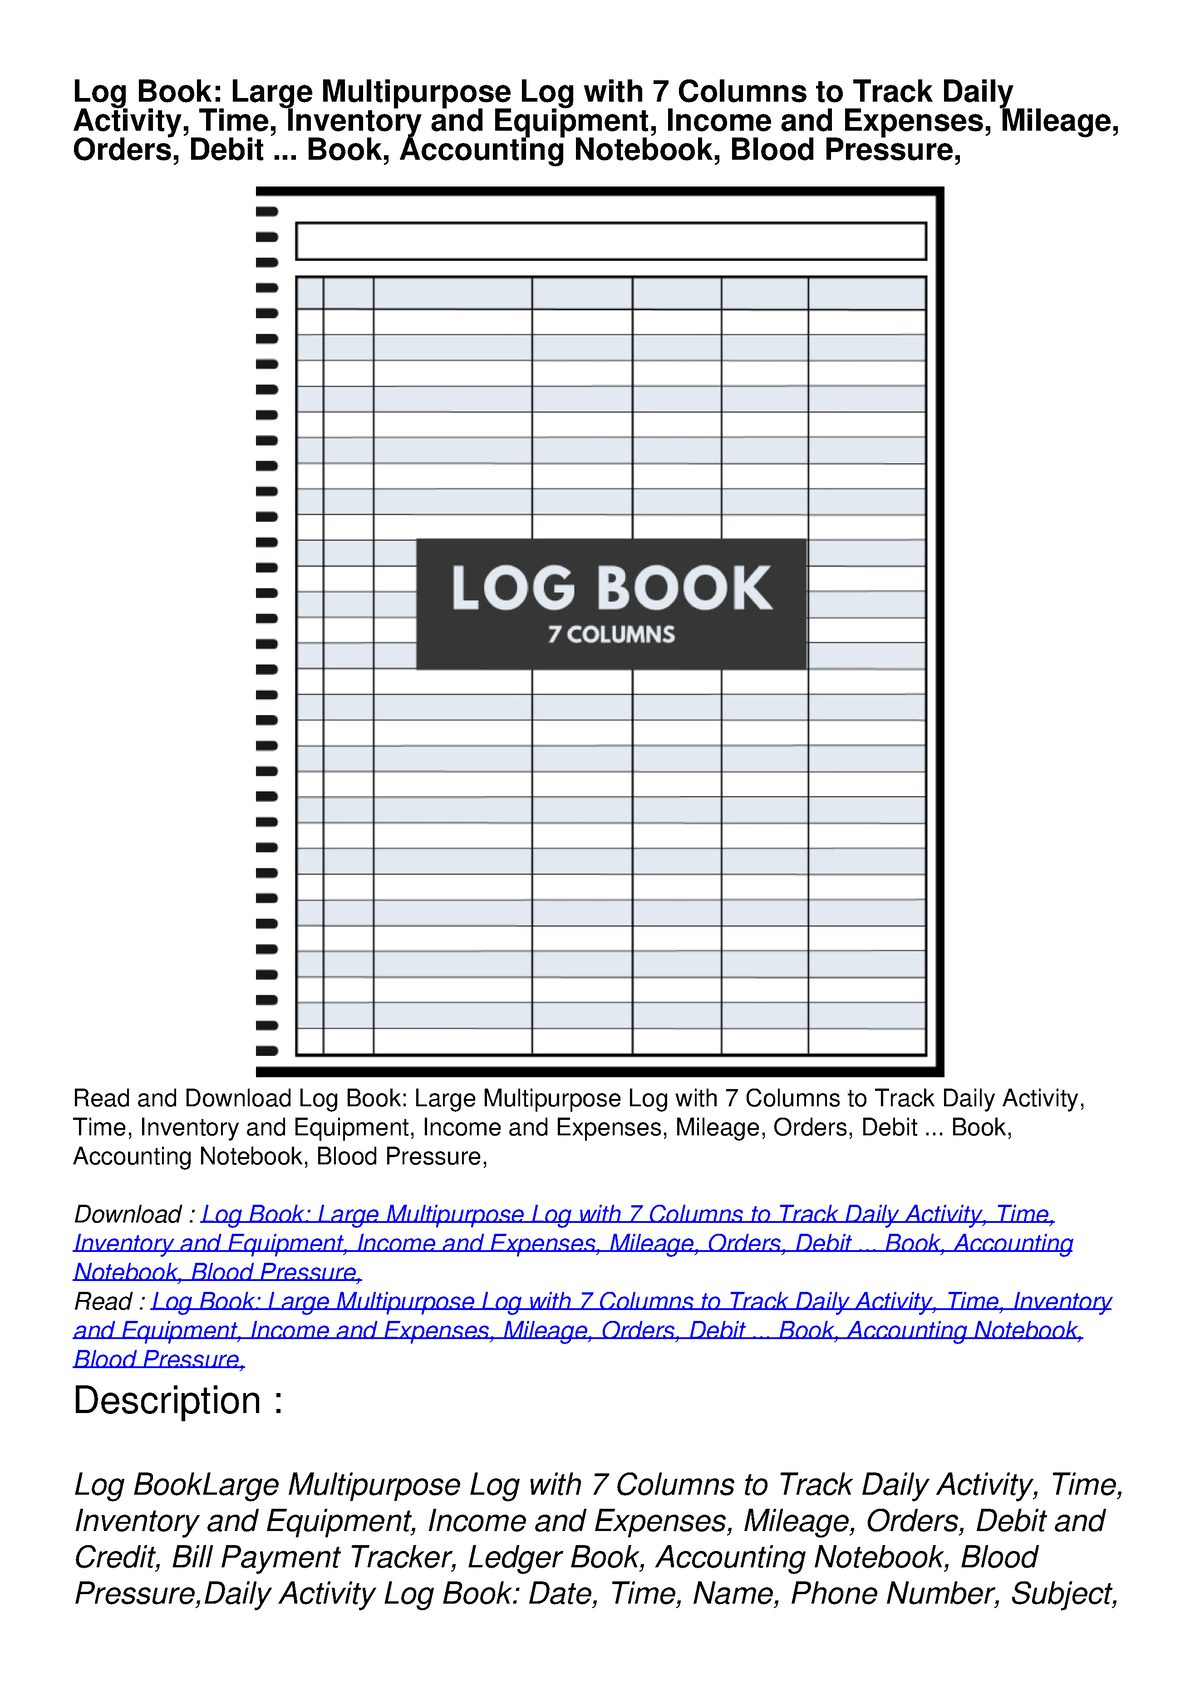  Log Book: Large Multipurpose with 7 Columns to Track